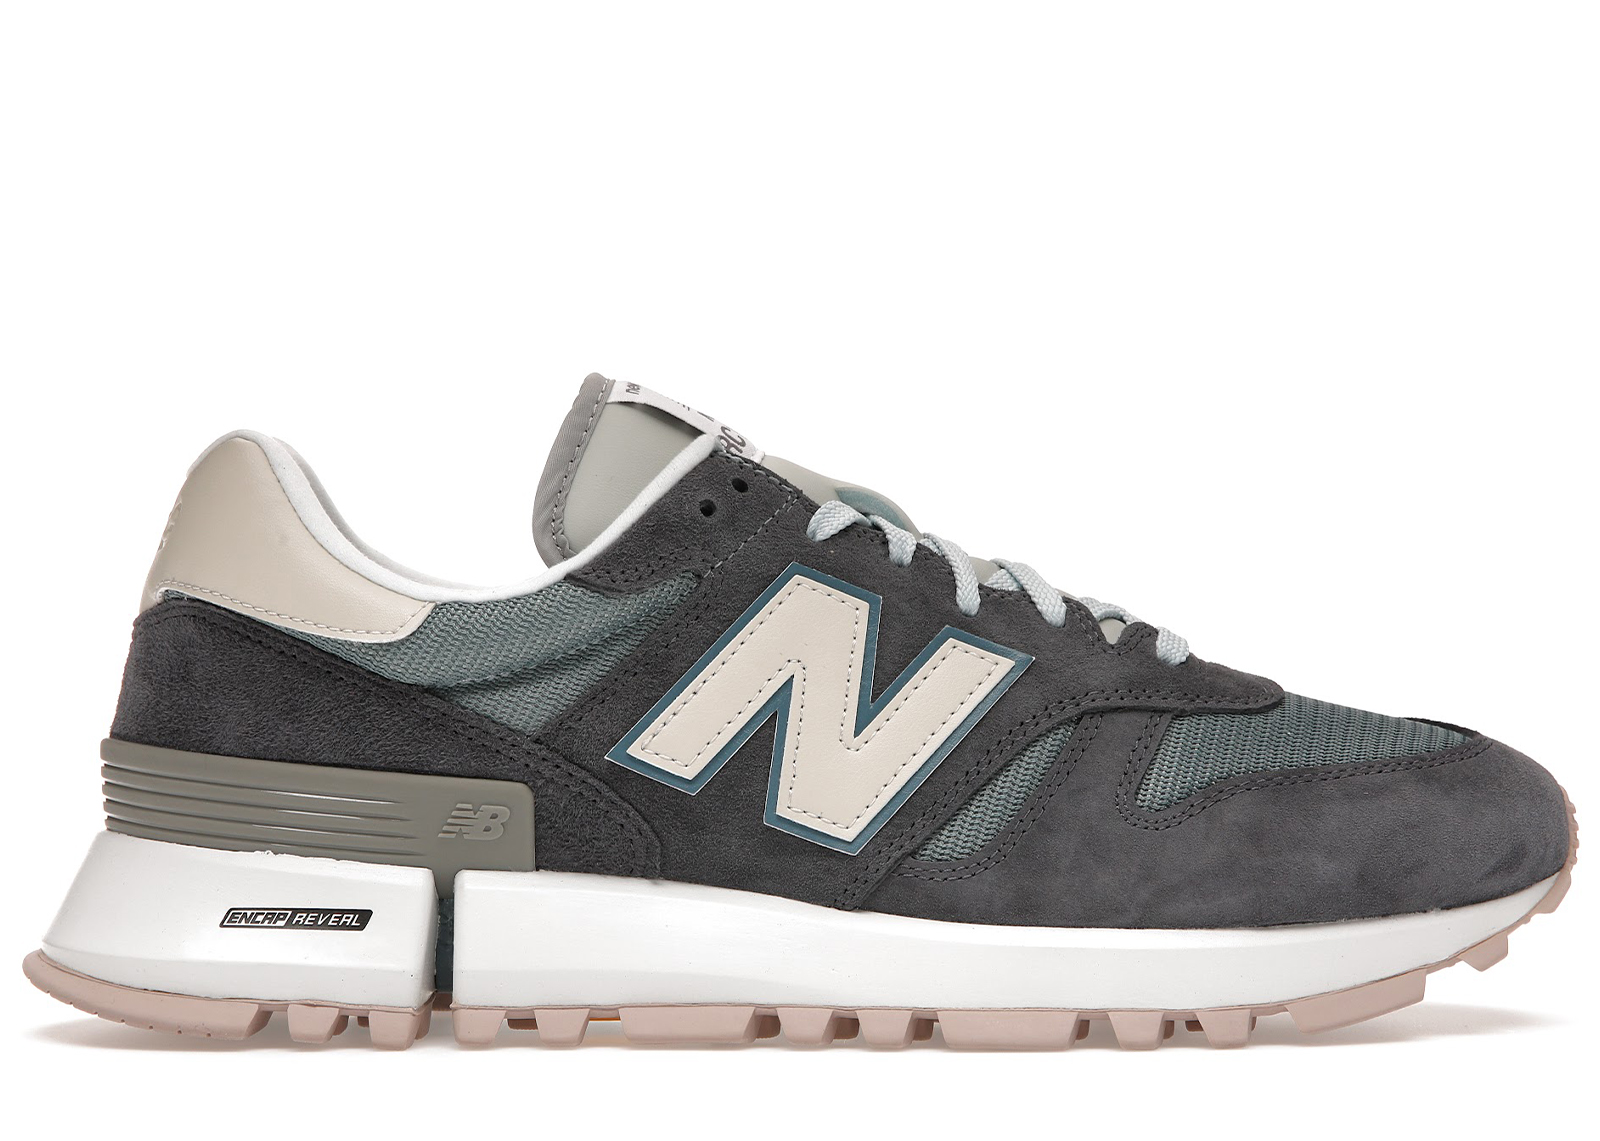 Buy New Balance 1300 Shoes & New Sneakers - StockX